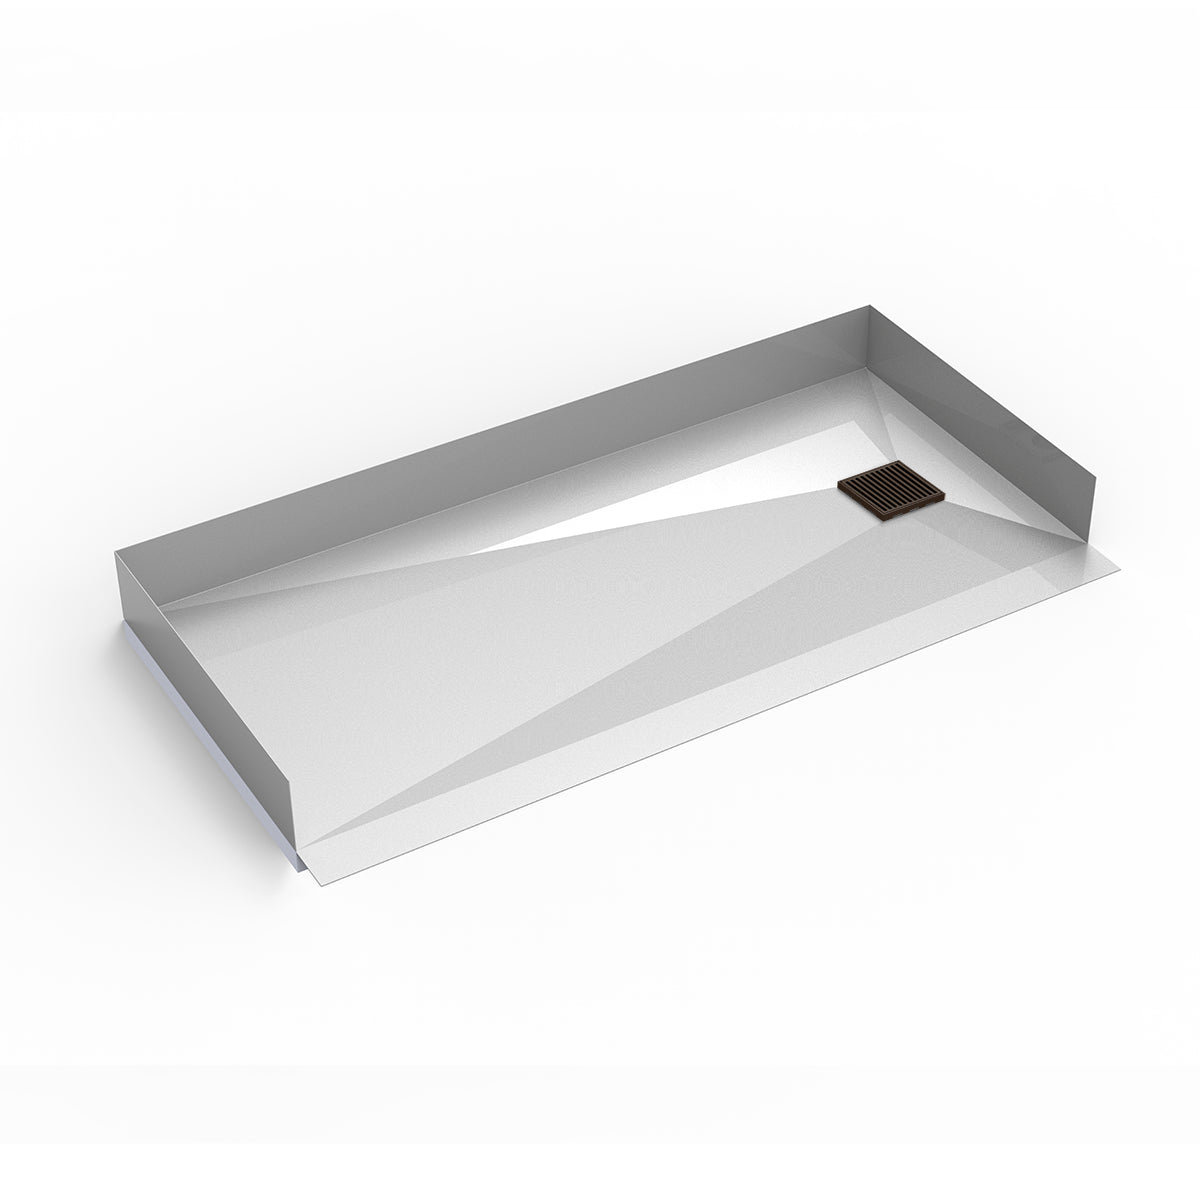 Infinity Drain 30"x 60" Curbless Stainless Steel Shower Base with Lines Pattern Right Drain location